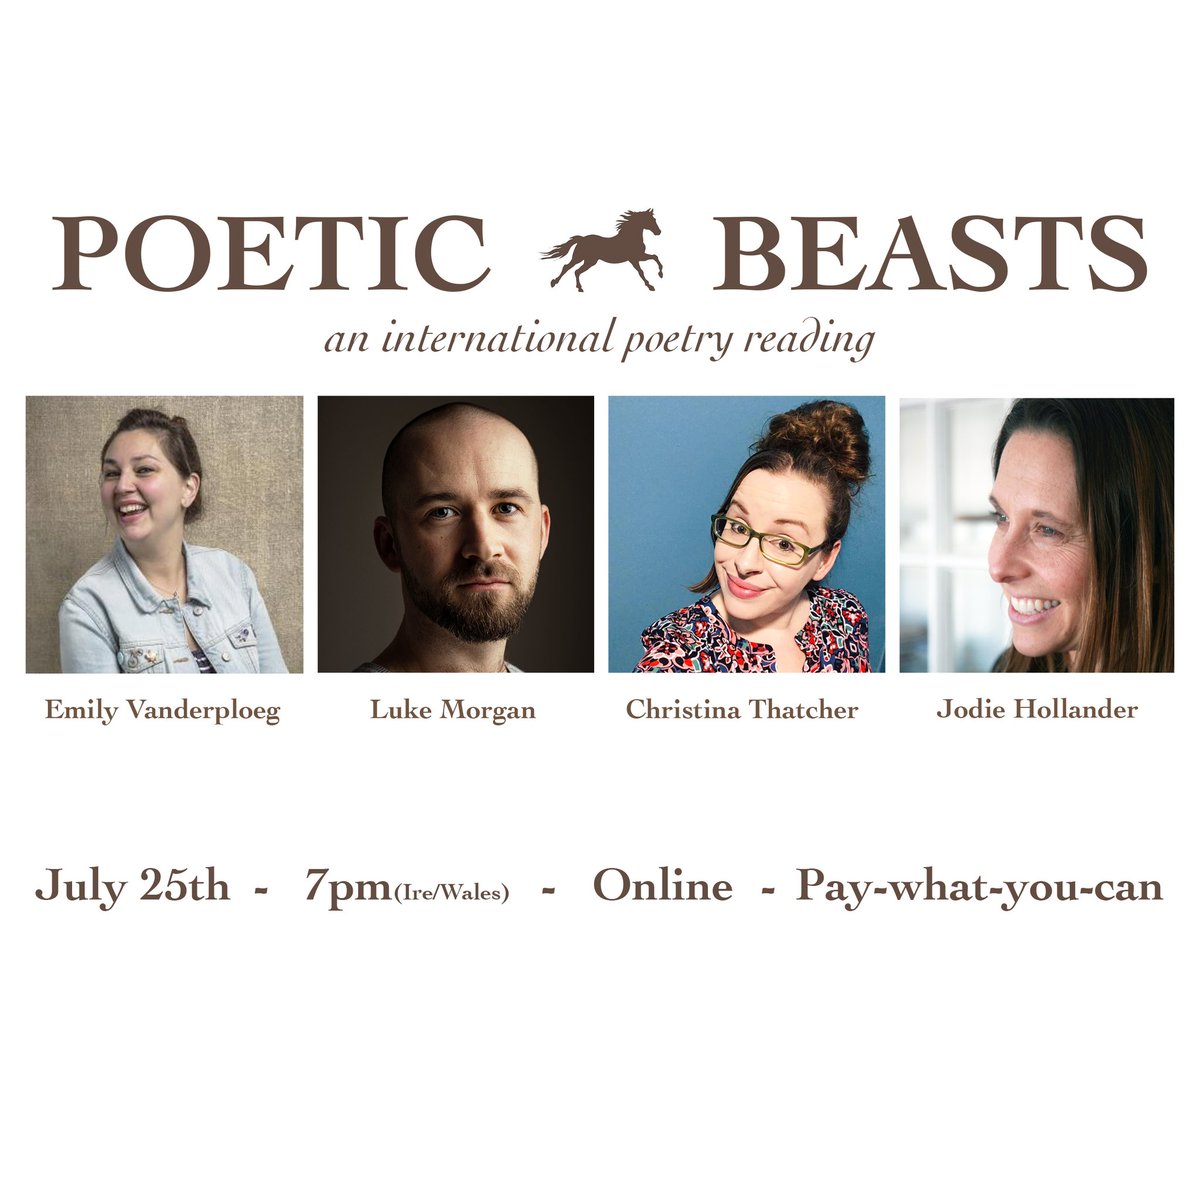 Excited to read with poets Christina Thatcher, Jodie Hollander and Emily Vanderploeg as part of this virtual event on 25th of July! Hosted by @cardiffuni. Click here to register ➡️ eventbrite.co.uk/e/poetic-beast… @writetoempower @dippy_dumpling